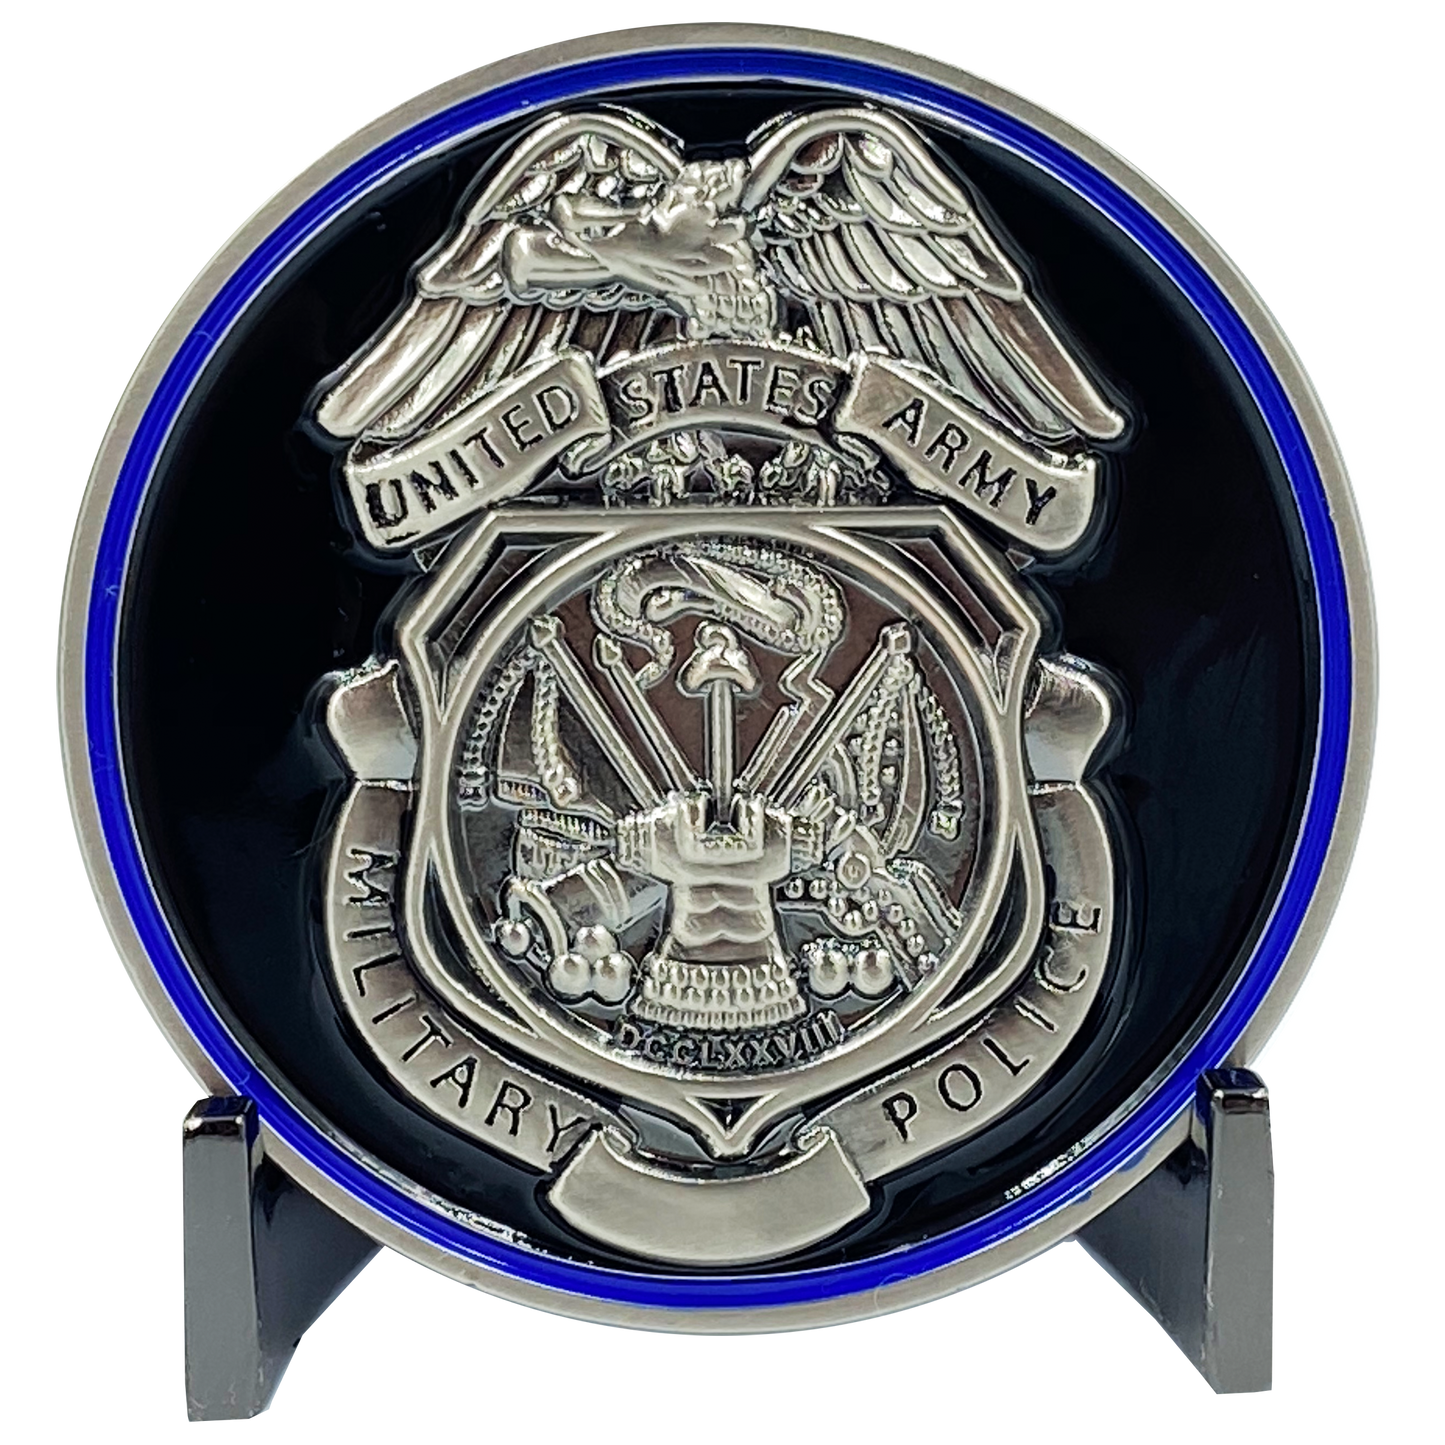 DL2-18 U.S. Army Military Police MP Challenge Coin